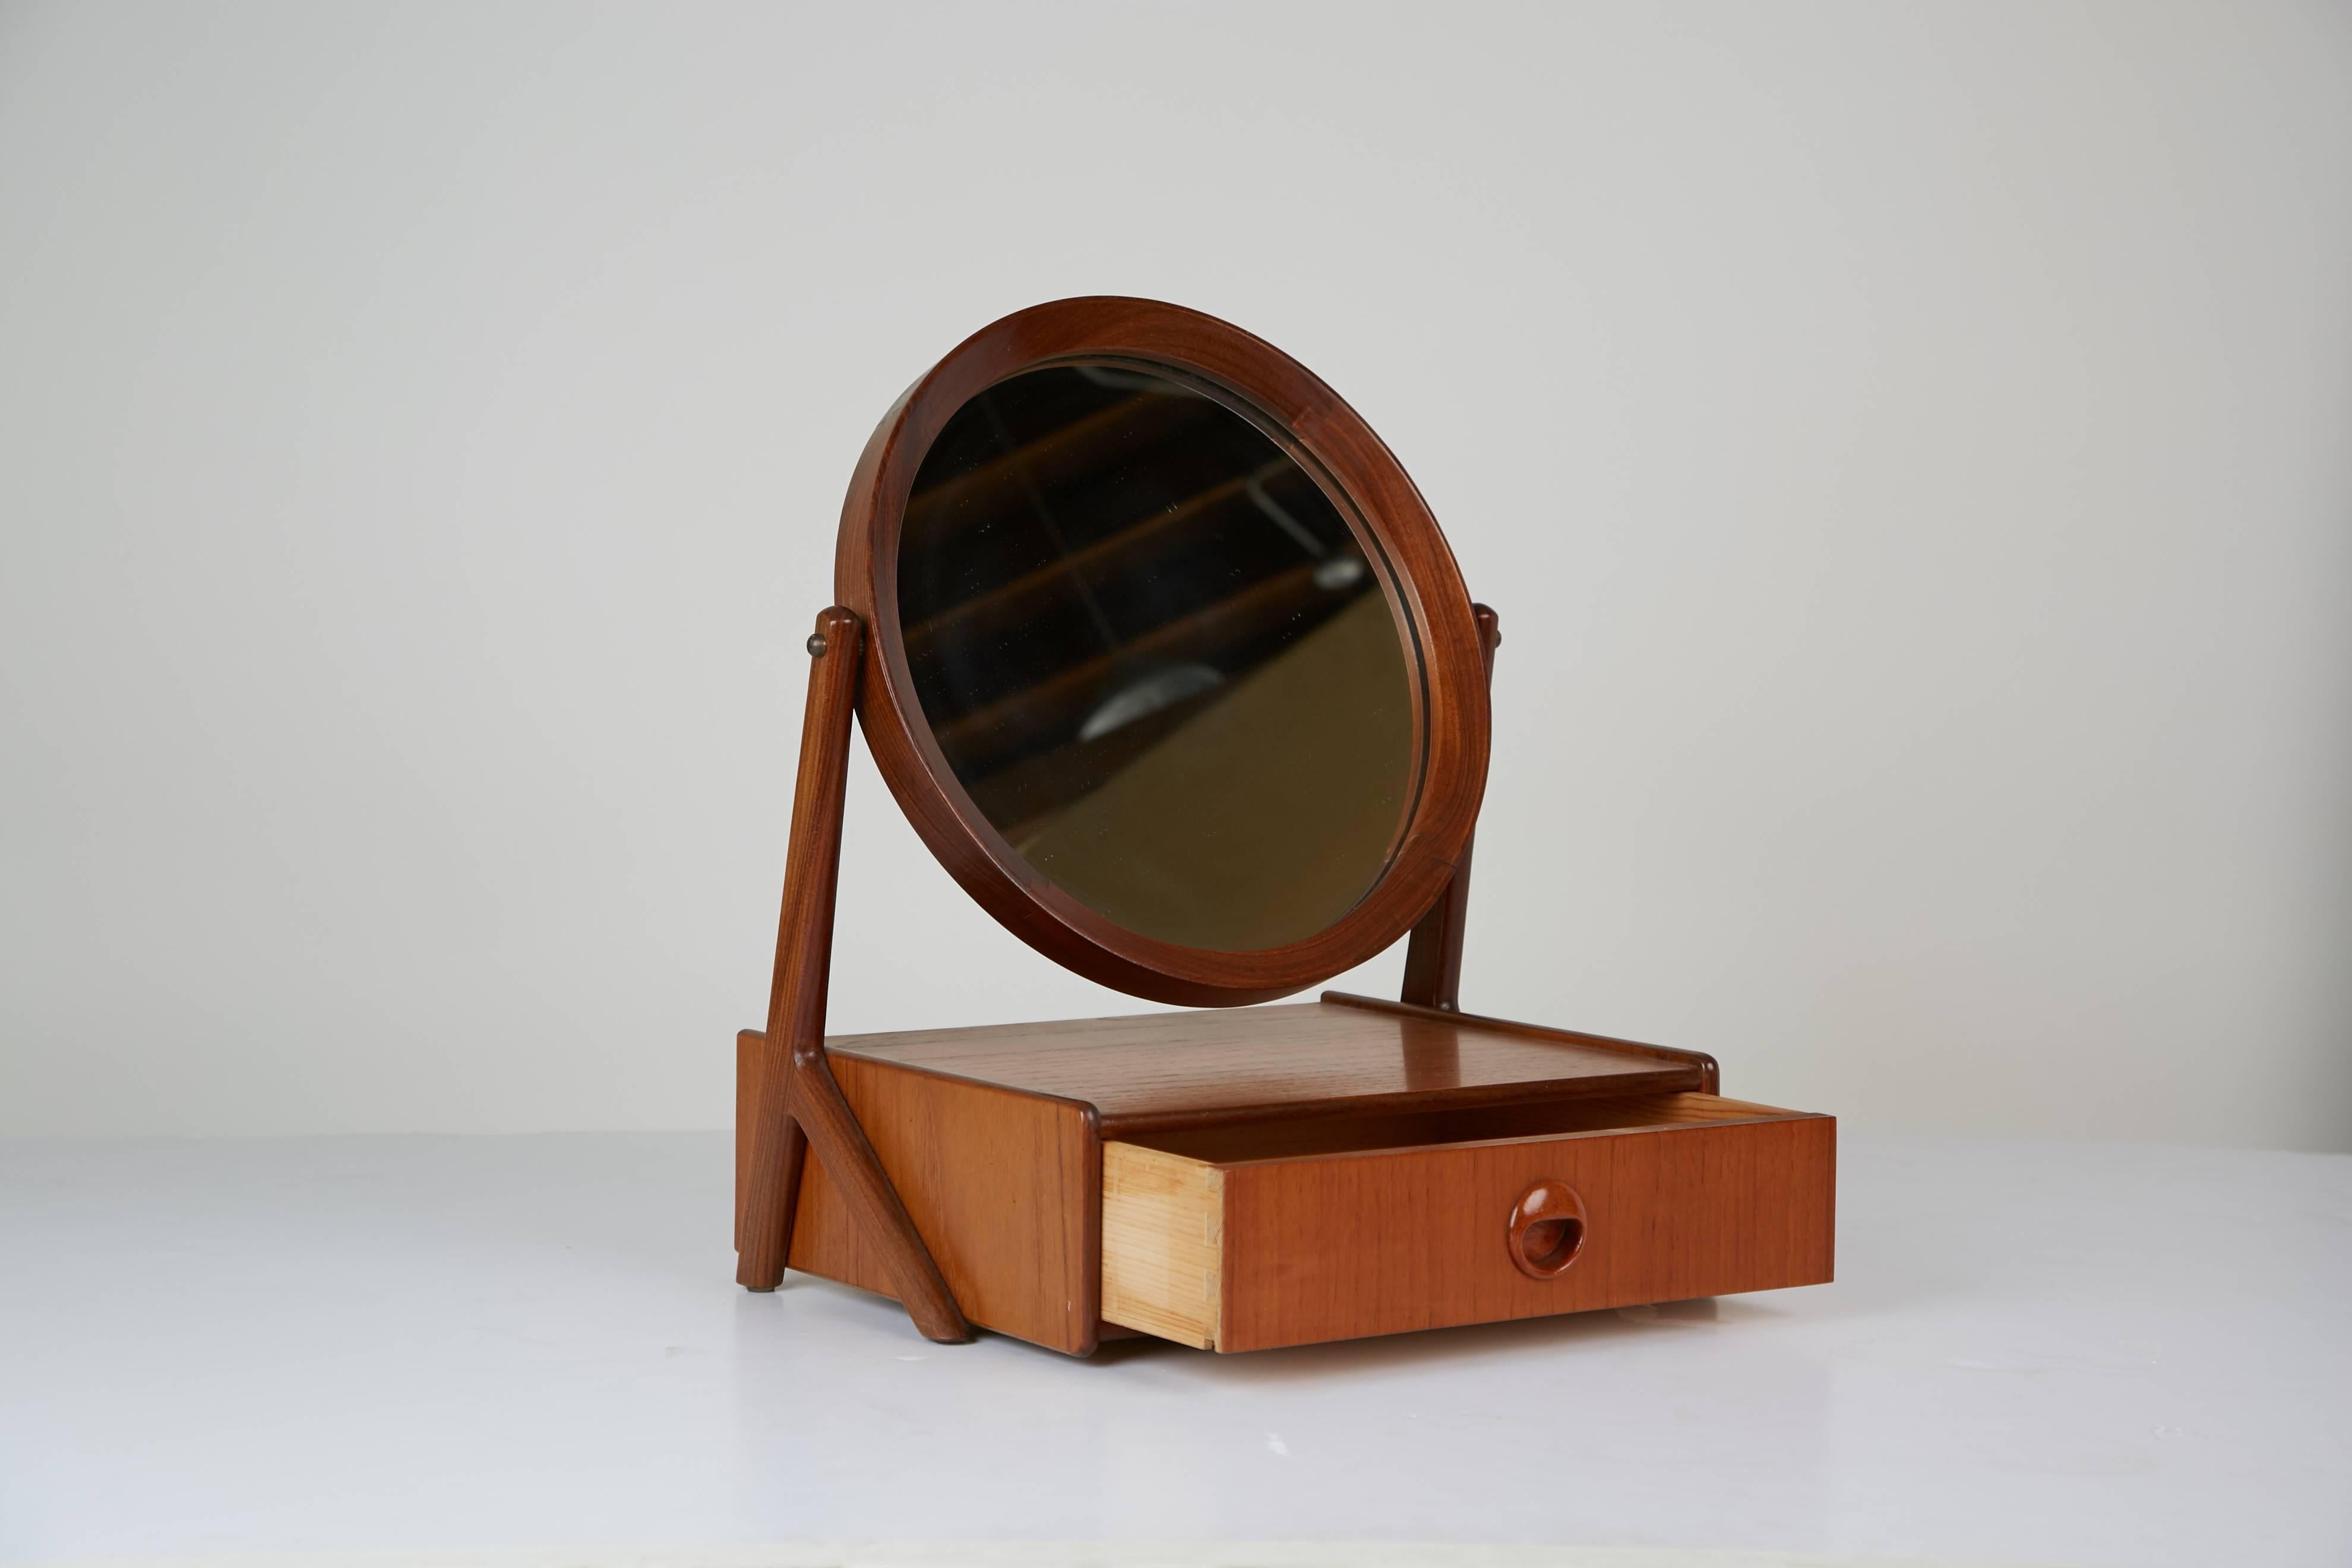 Beautifully crafted Talgos Mobelfabrikk vanity mirror, made in Todalen, Norway. This recently refinished dressing mirror is fabricated from teak with a circular mirror suspended and secured onto two extended sculptural wood pieces, allowing for the